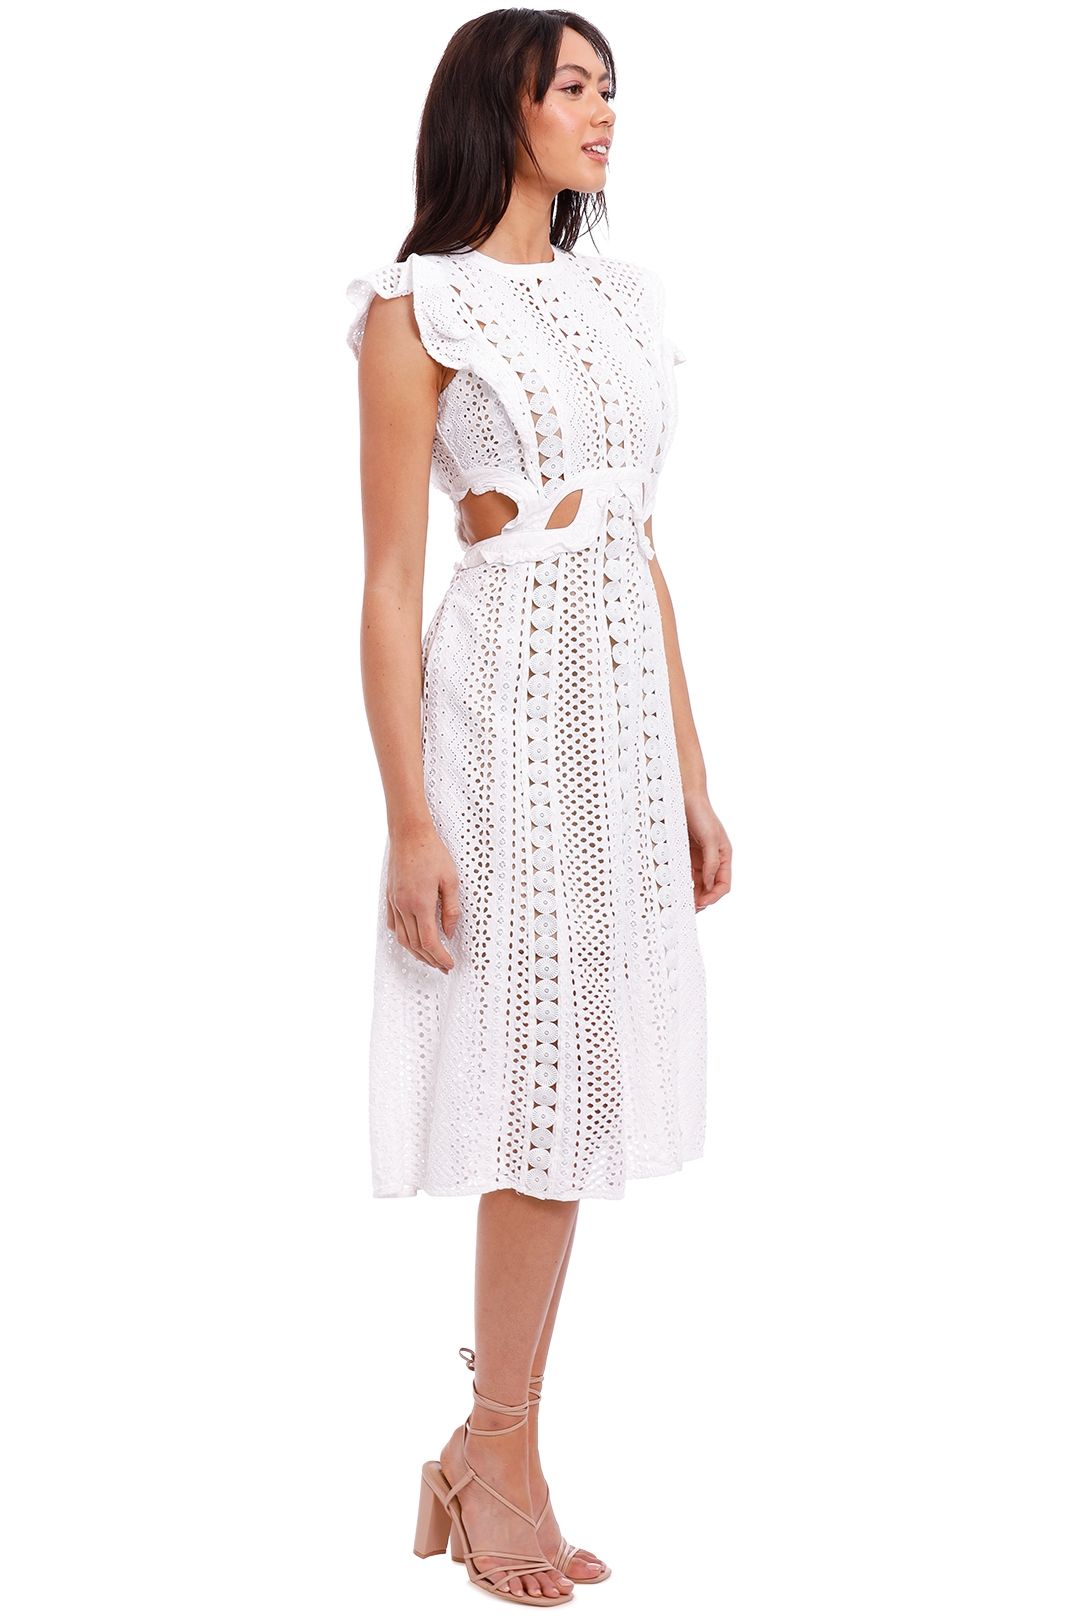 Self Portrait Embroidered Cut-Out Midi Dress Lace 